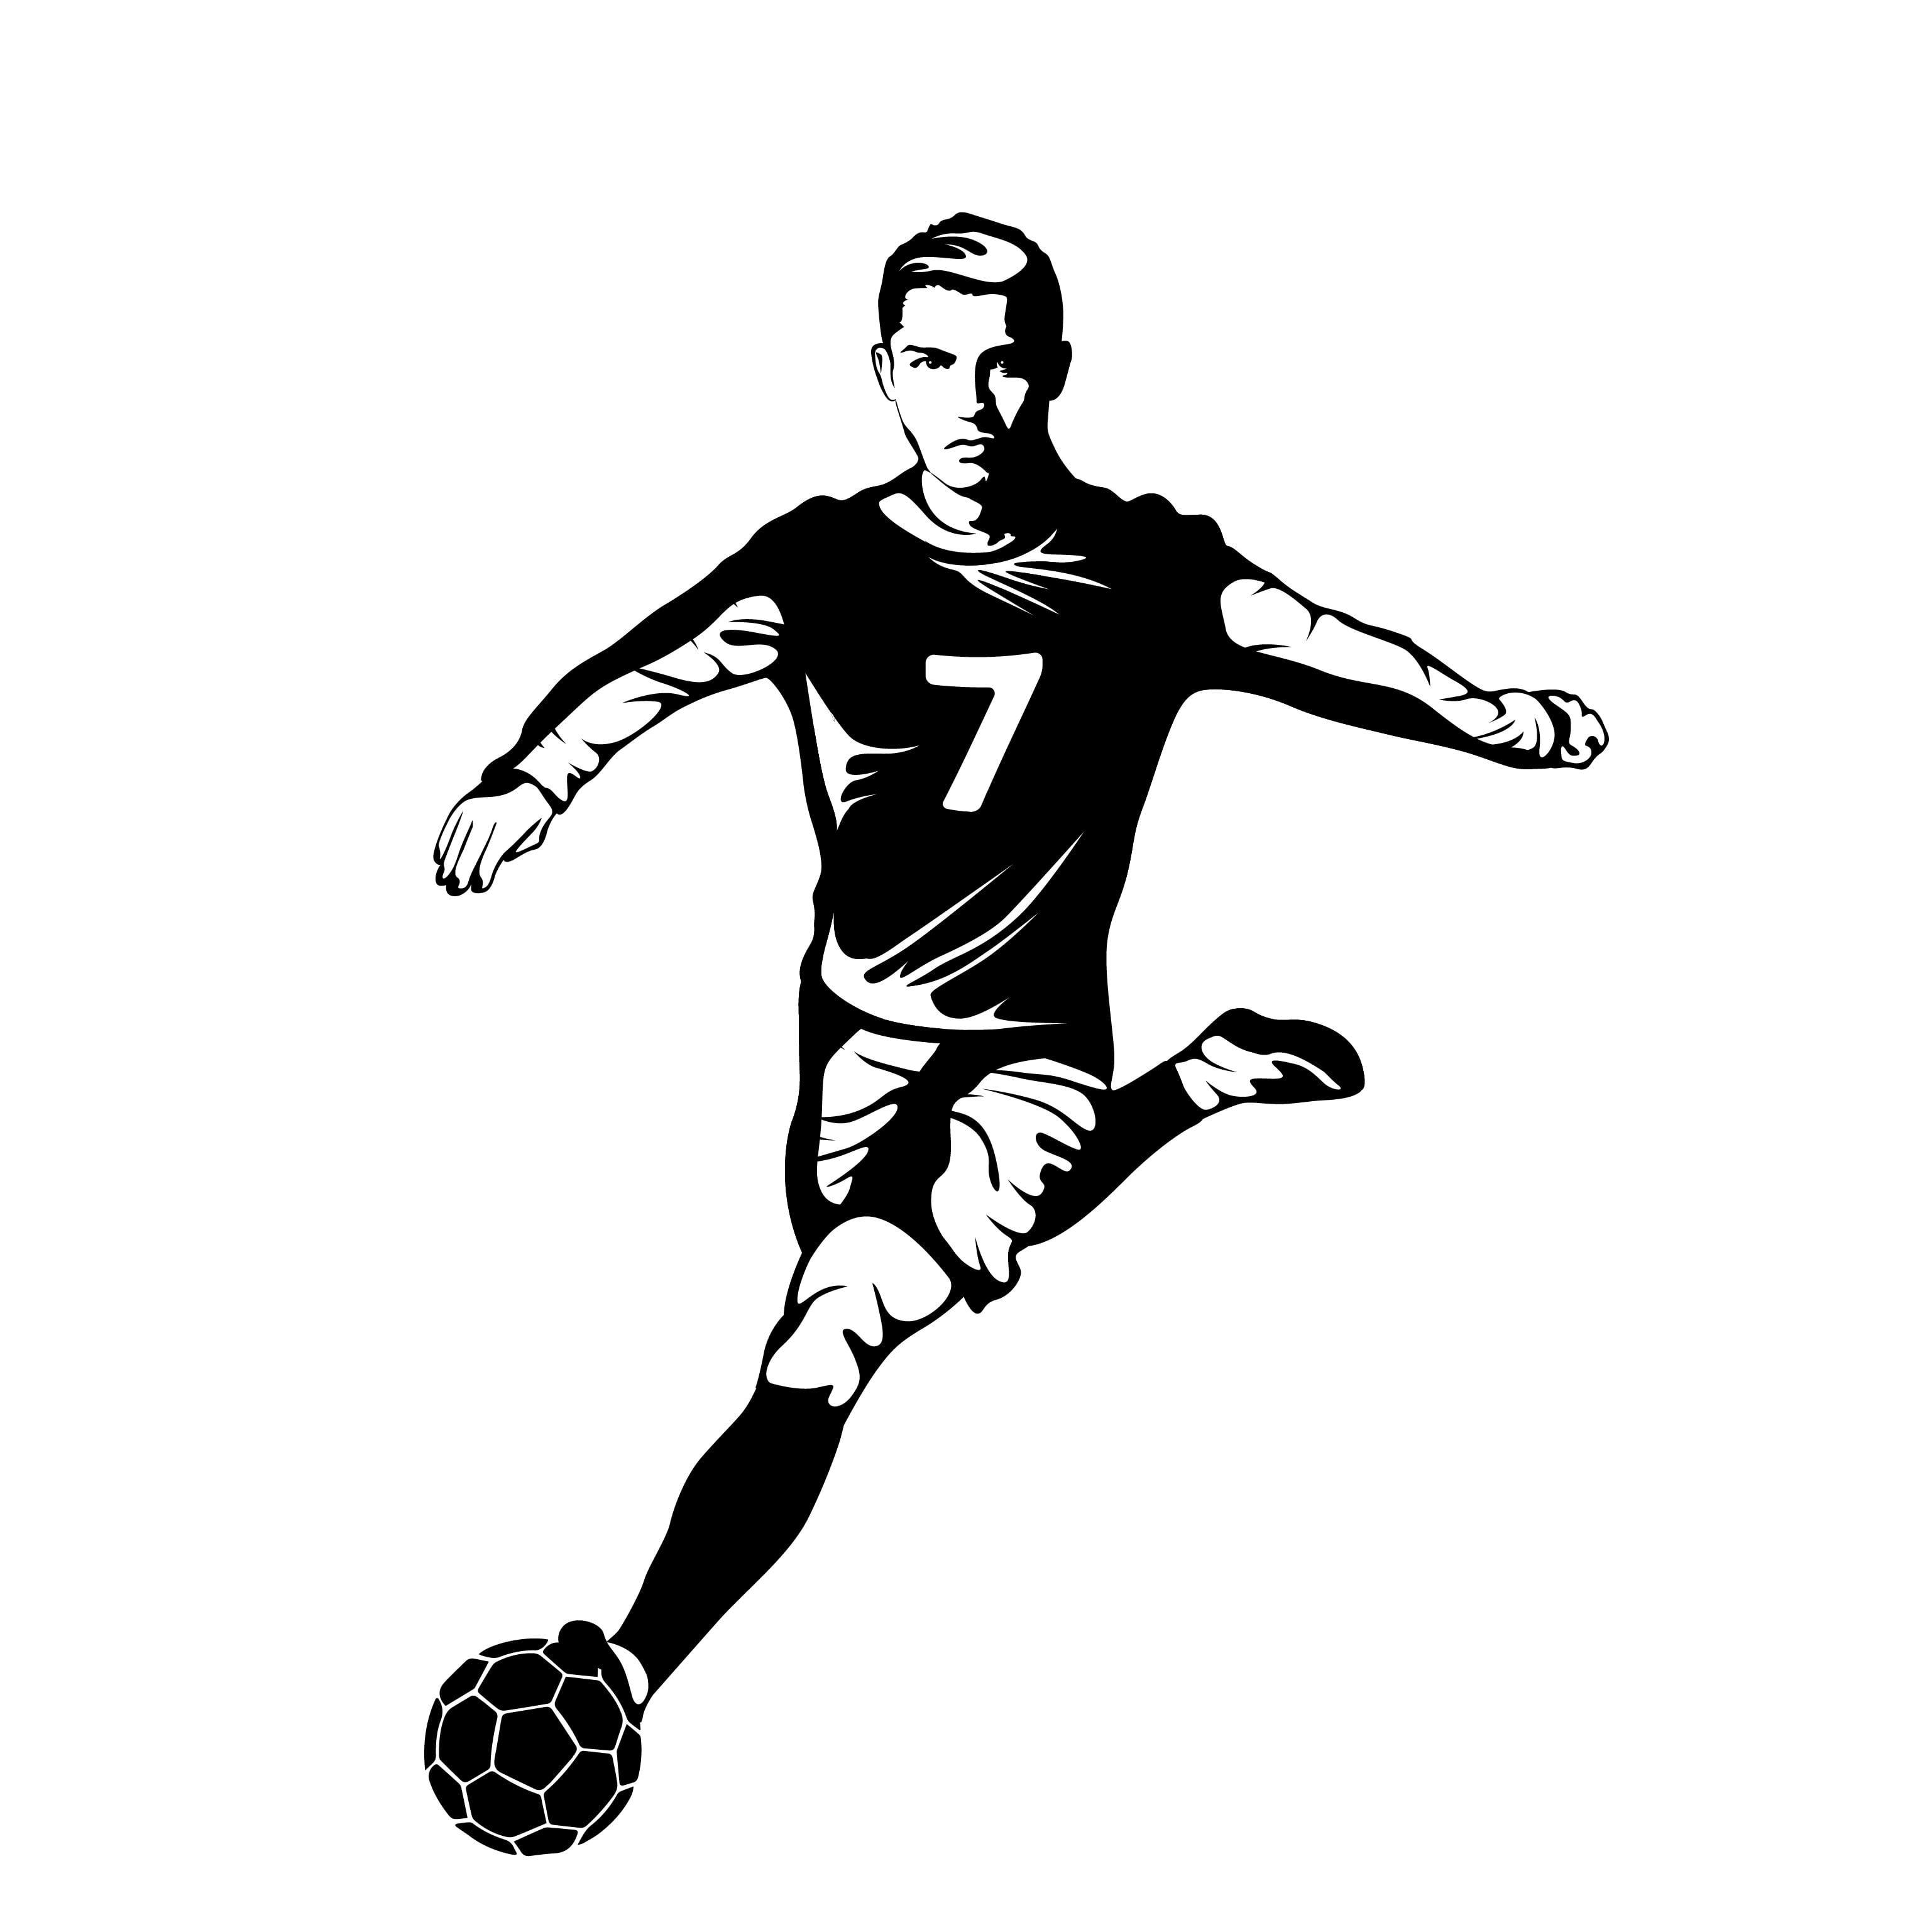 Soccer girl wall decal,futbol girl wall sticker soccer silhouette name decal 